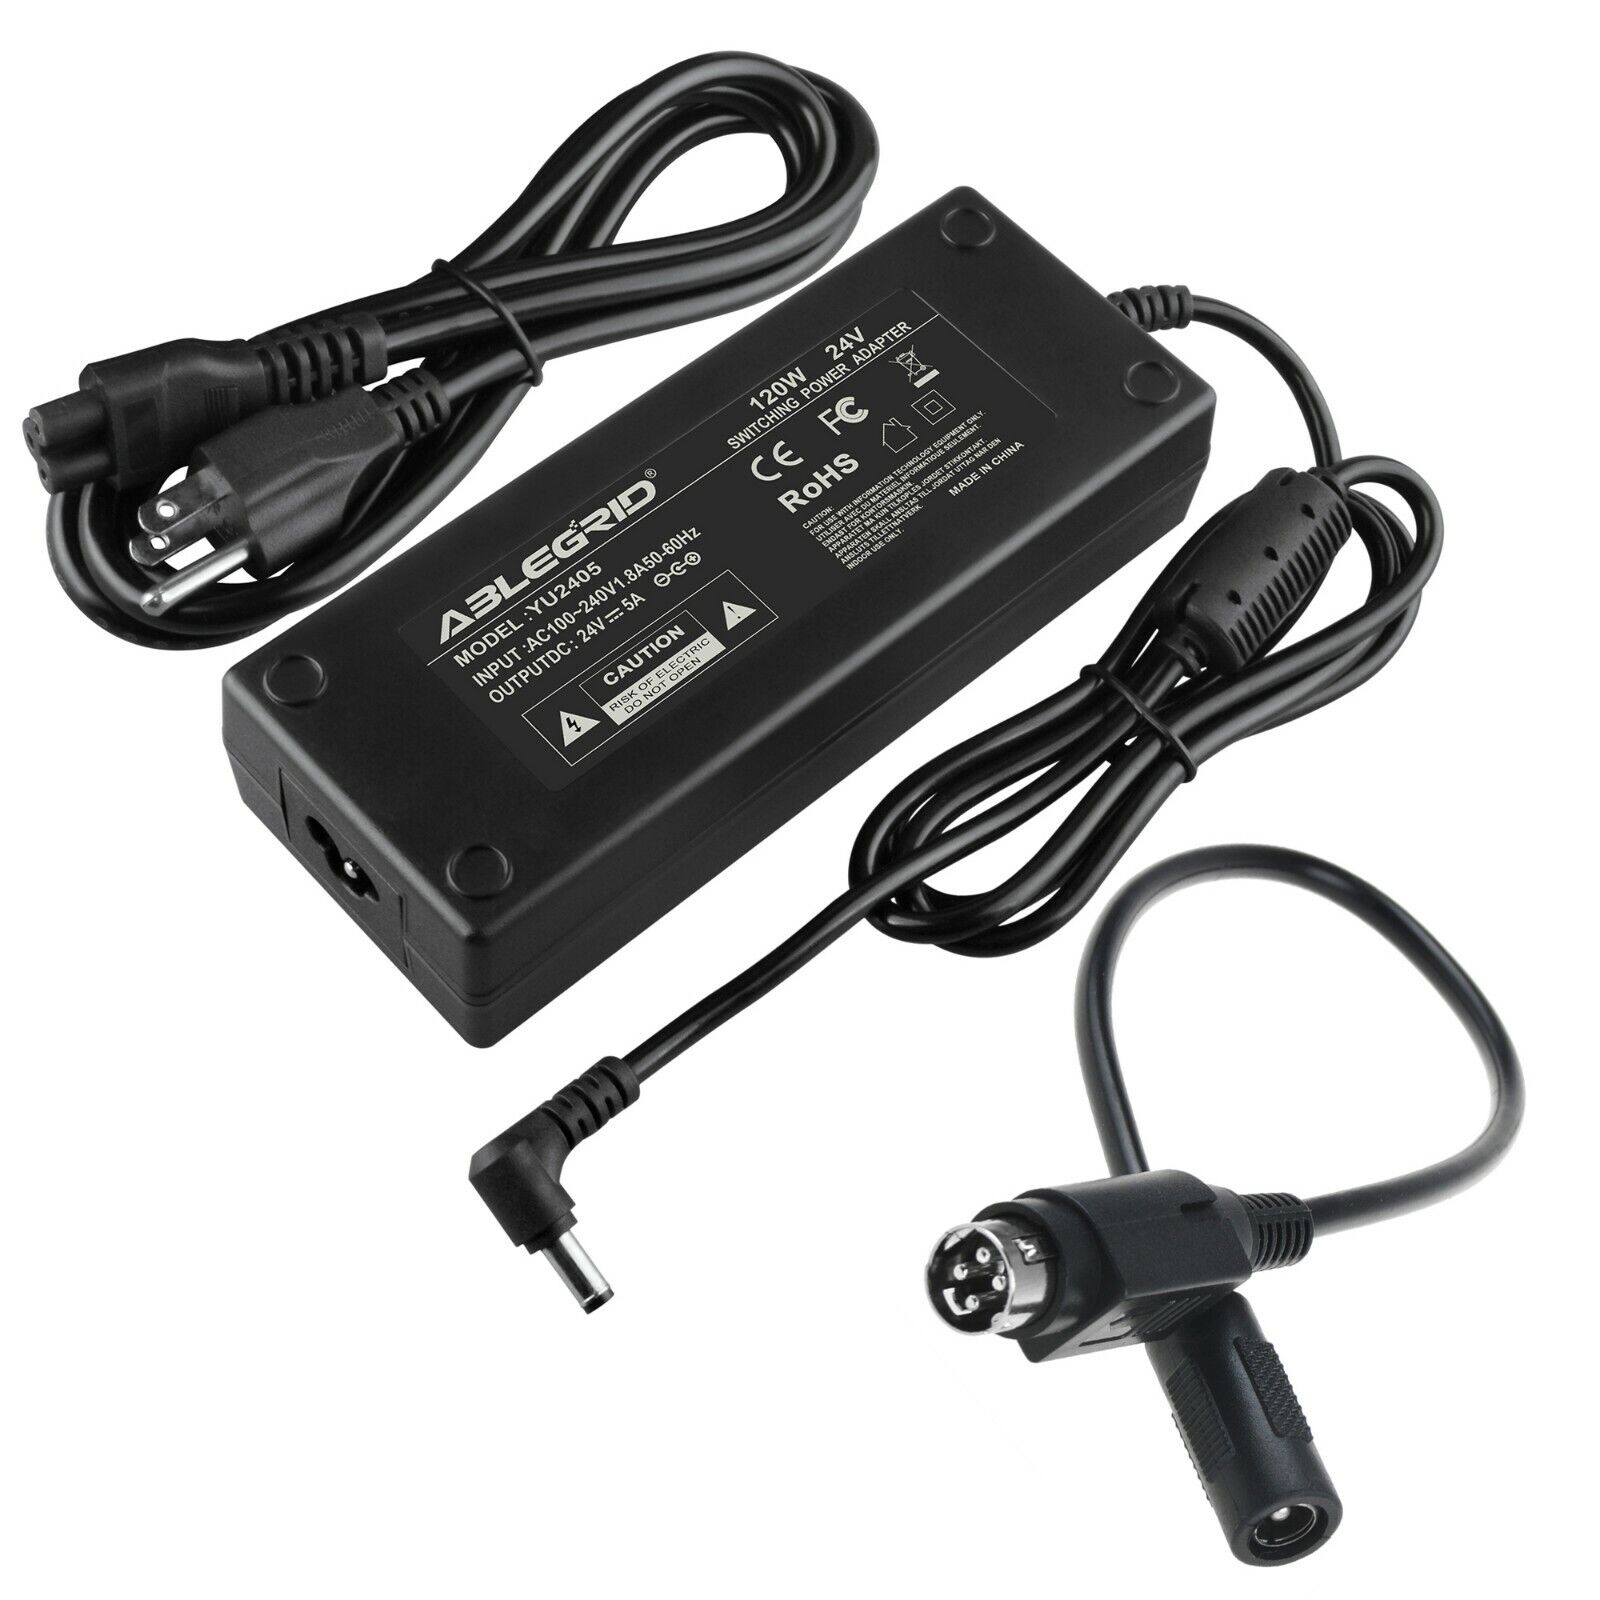 24V 5A 4 pin AC Adapter Charger for Mintek DTV-233 LCD TV DVD Combo Power Supply